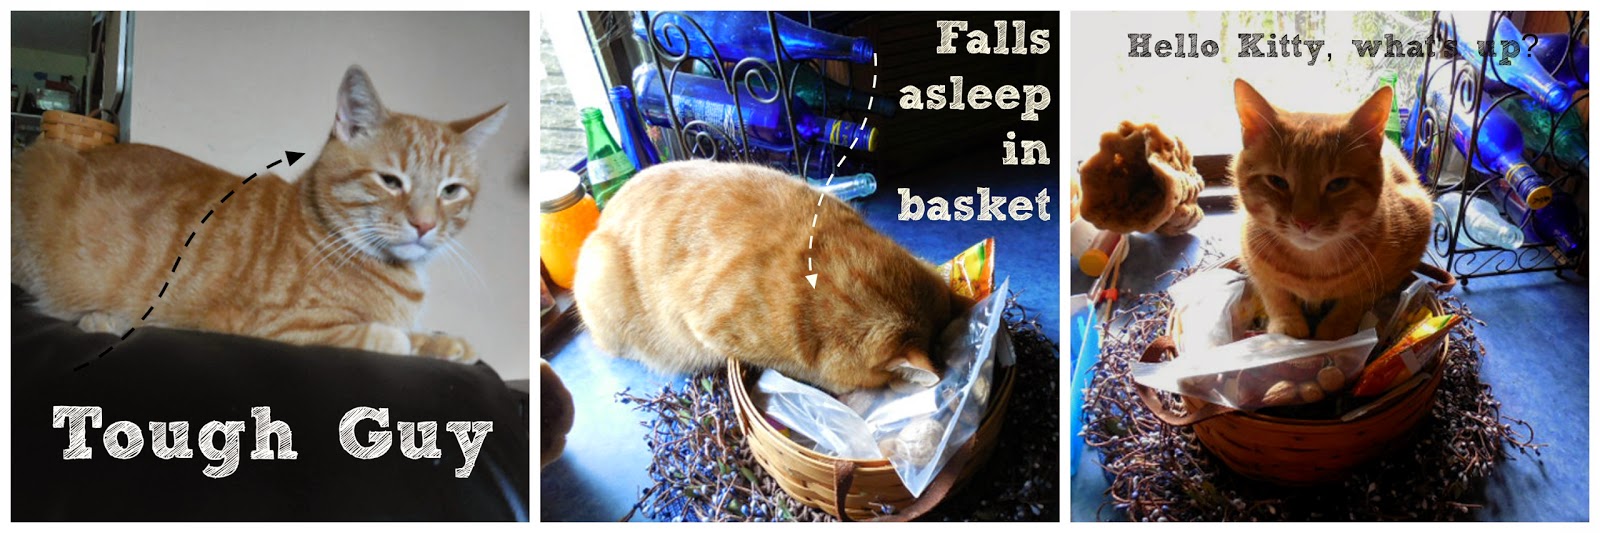 Cat Sleeping in Basket: Caturday Pictures